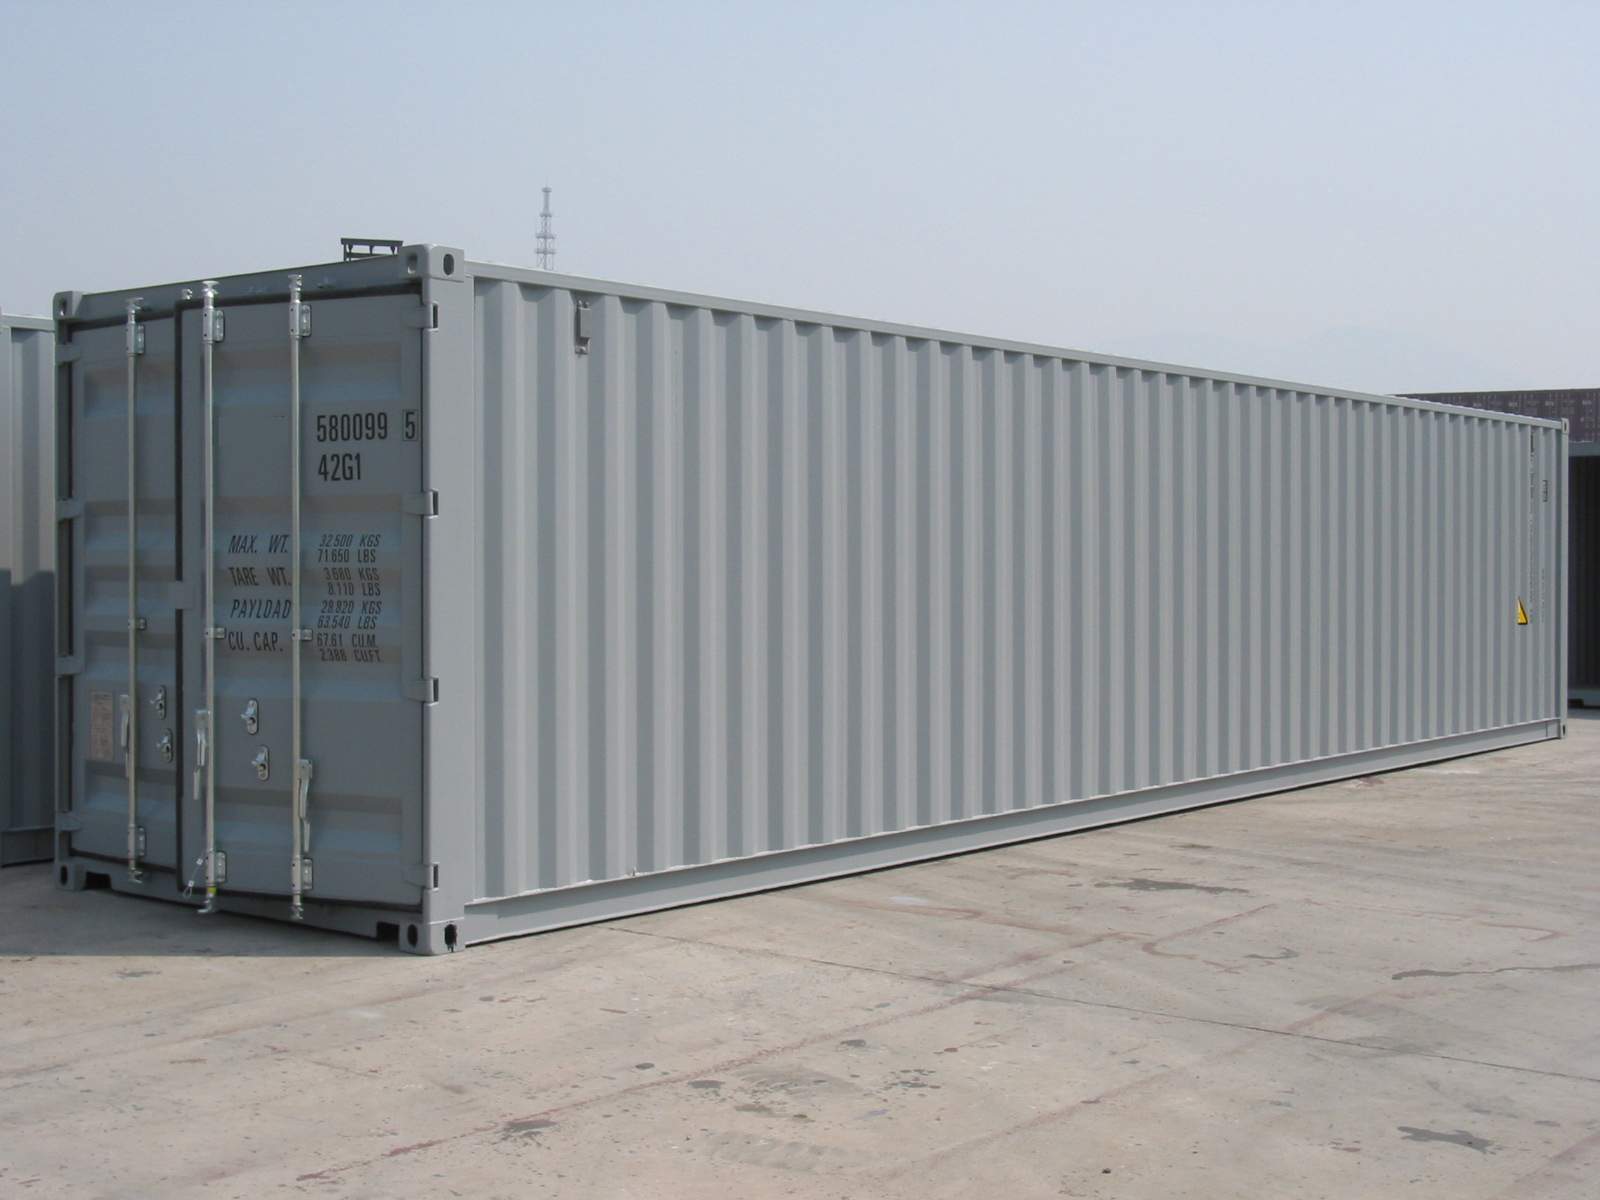 Storage Tips When Using Portable Storage Containers